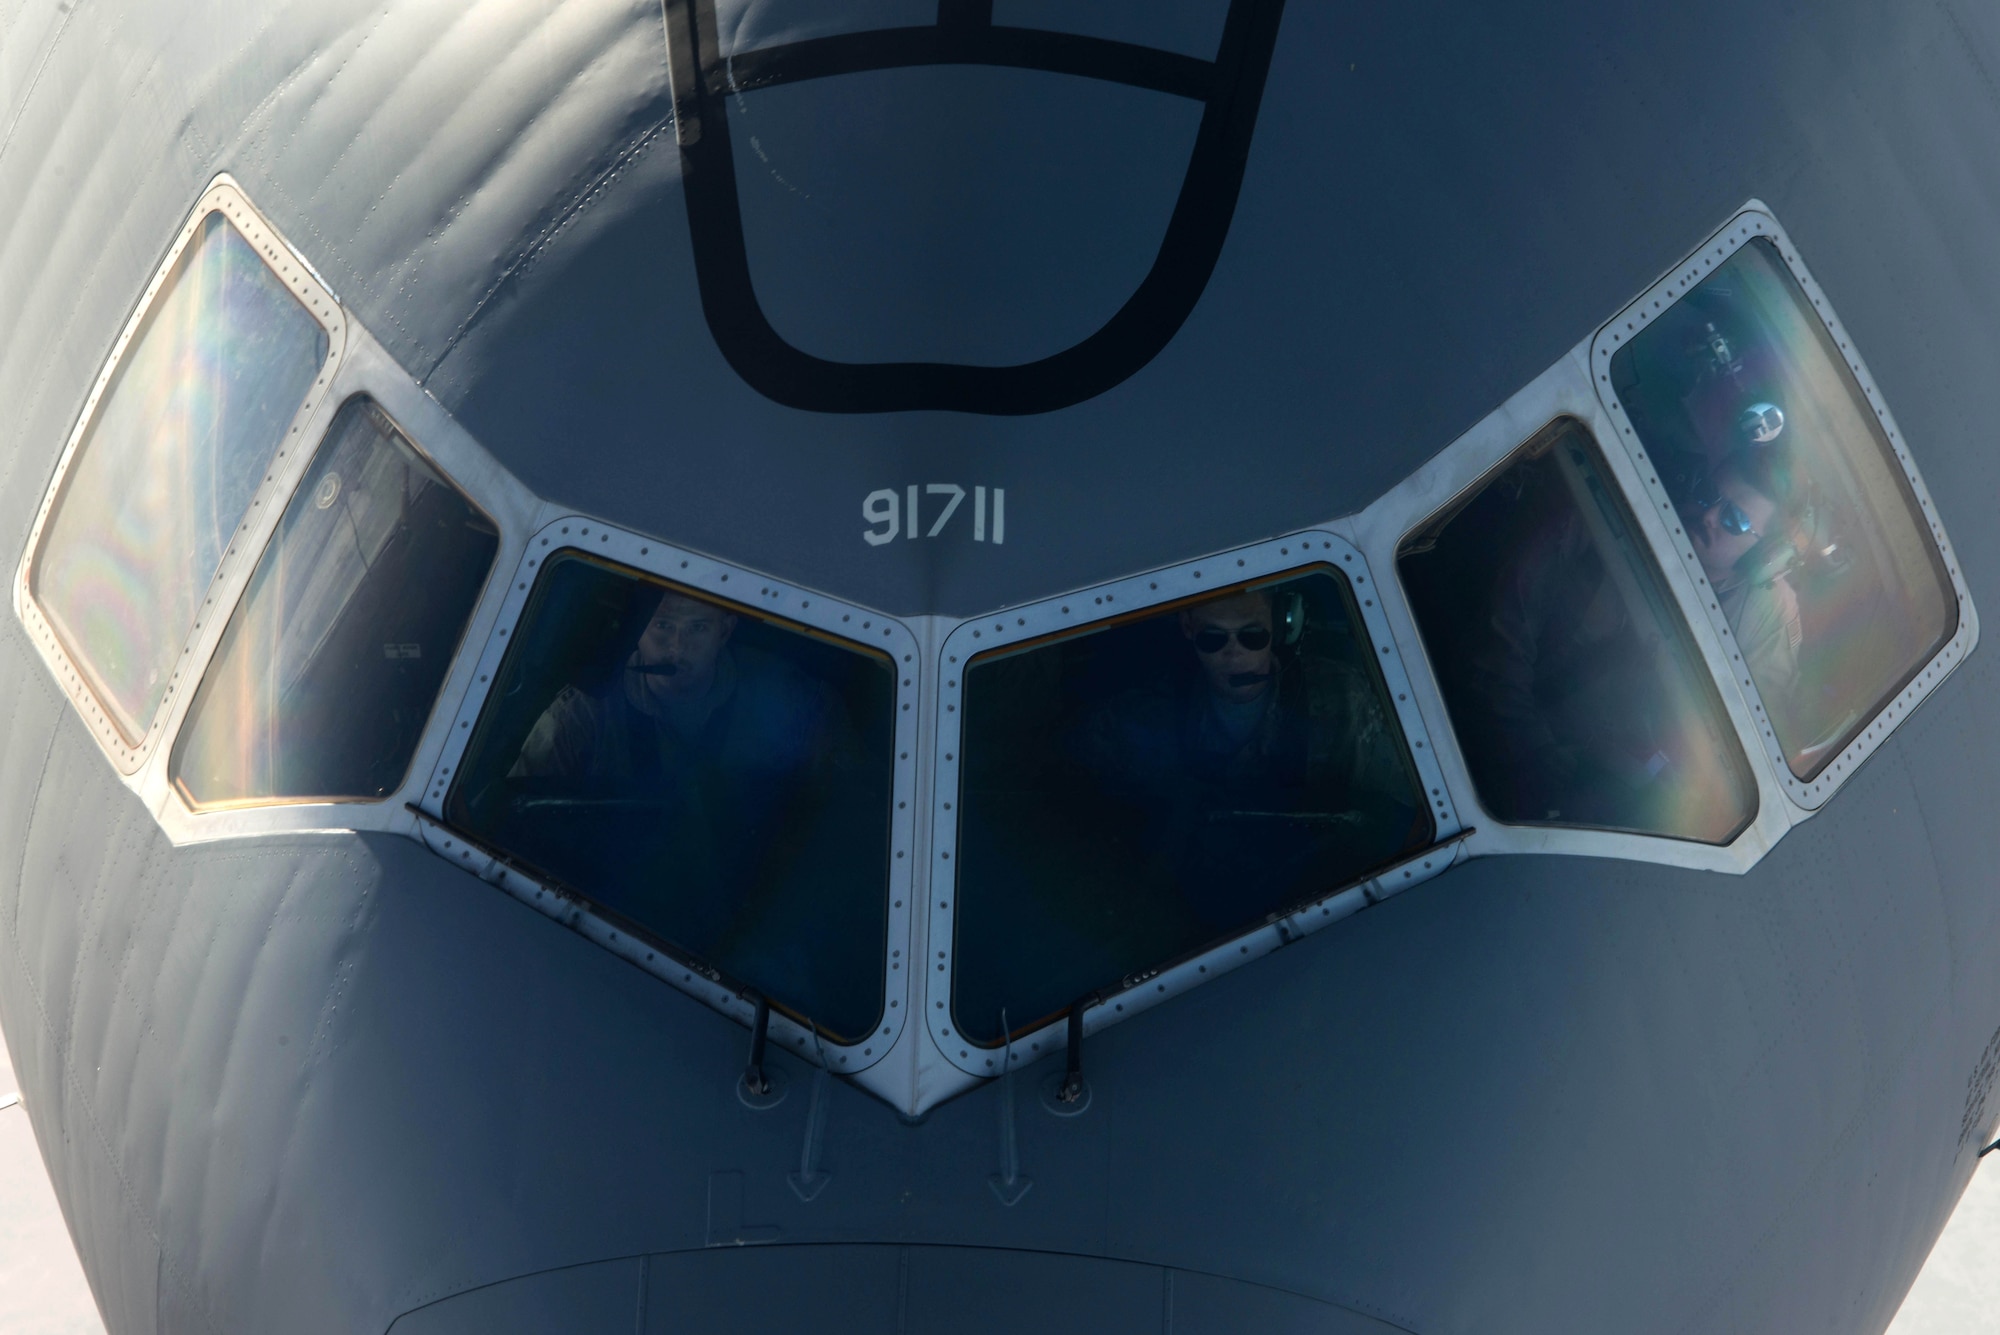 A U.S. Air Force KC-10 Extender air crew waits to finish refueling while flying near Mosul, Iraq, Nov. 20, 2016. The KC-10 Extender is an Air Mobility Command advanced tanker and cargo aircraft designed to provide increased global mobility for U.S. and Coalition armed forces. (U.S. Air Force photo by Staff Sgt. R. Alex Durbin)